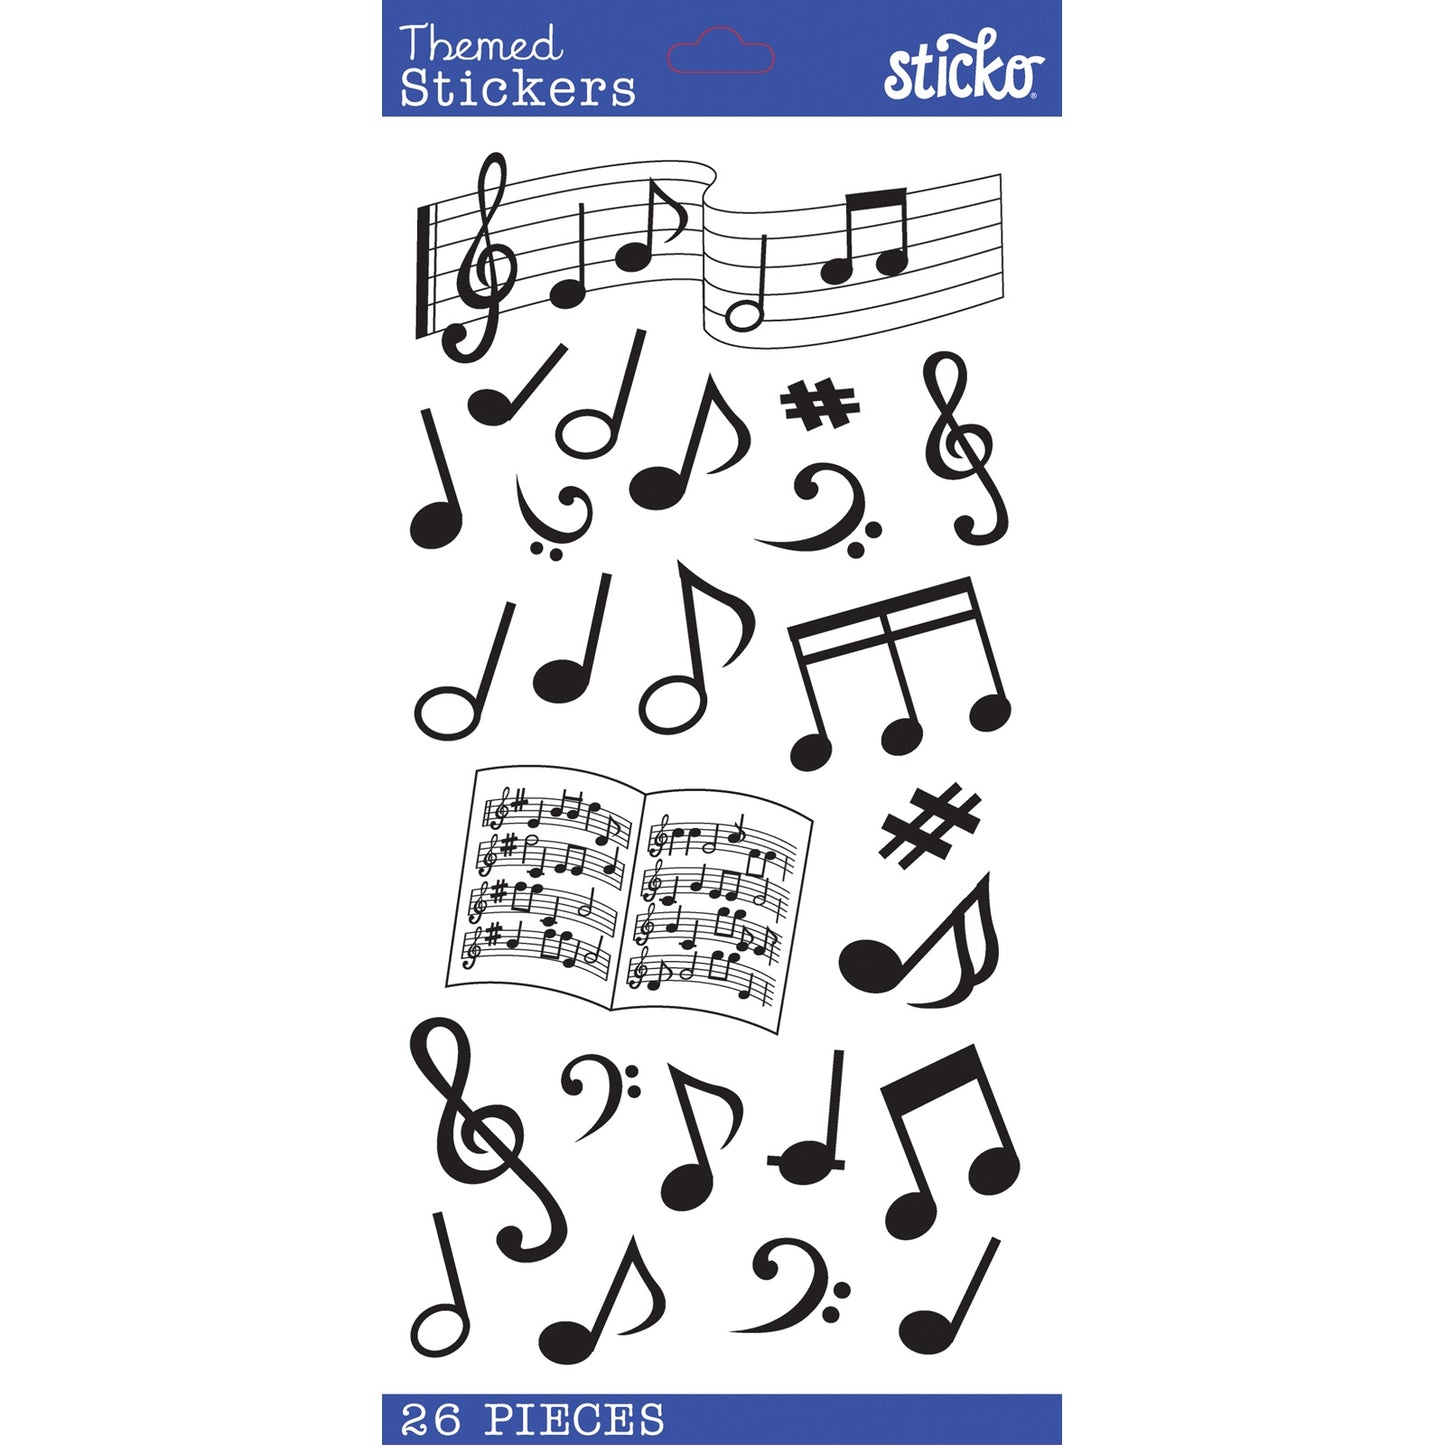 Sticko Themed Stickers-Silhouette Music Notes Classic